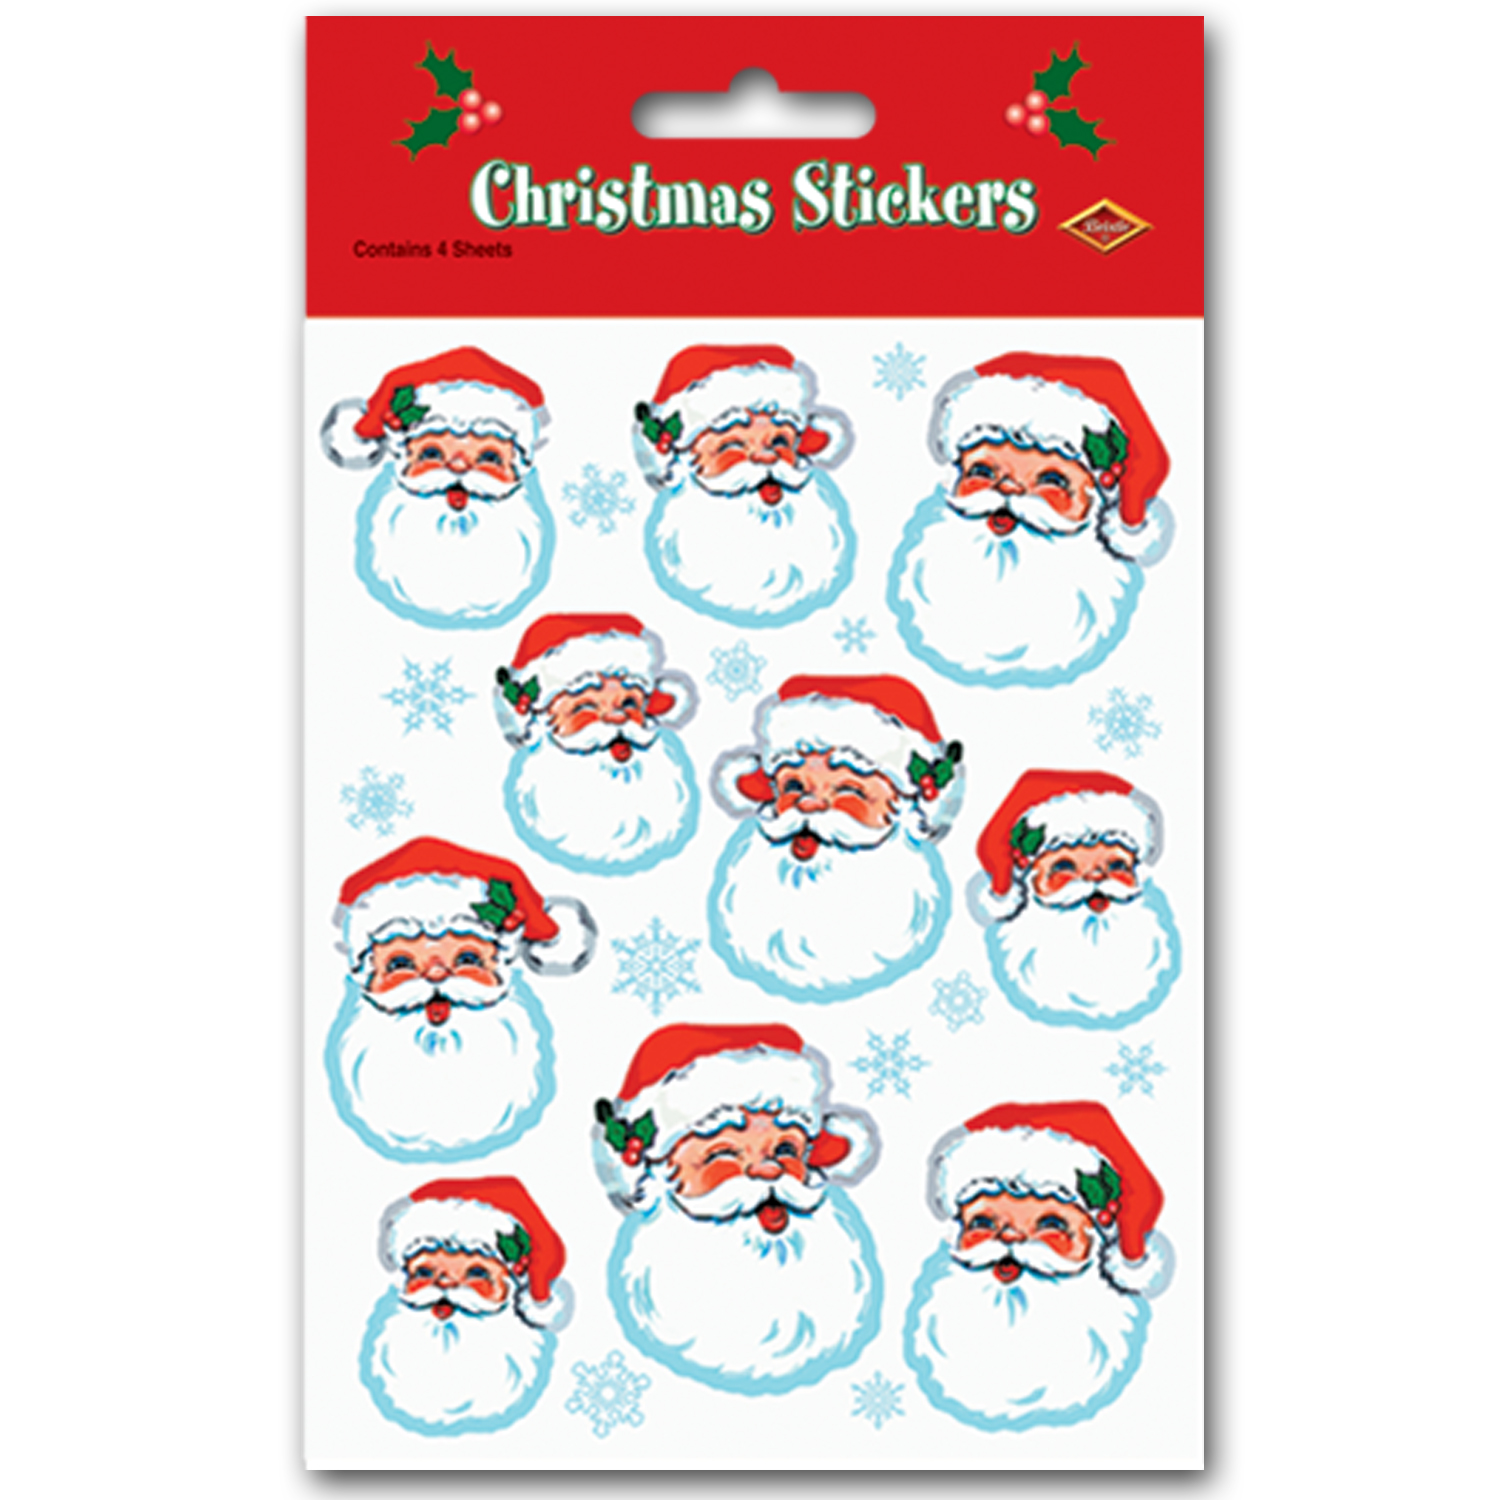 Holiday Stickers & Cutouts